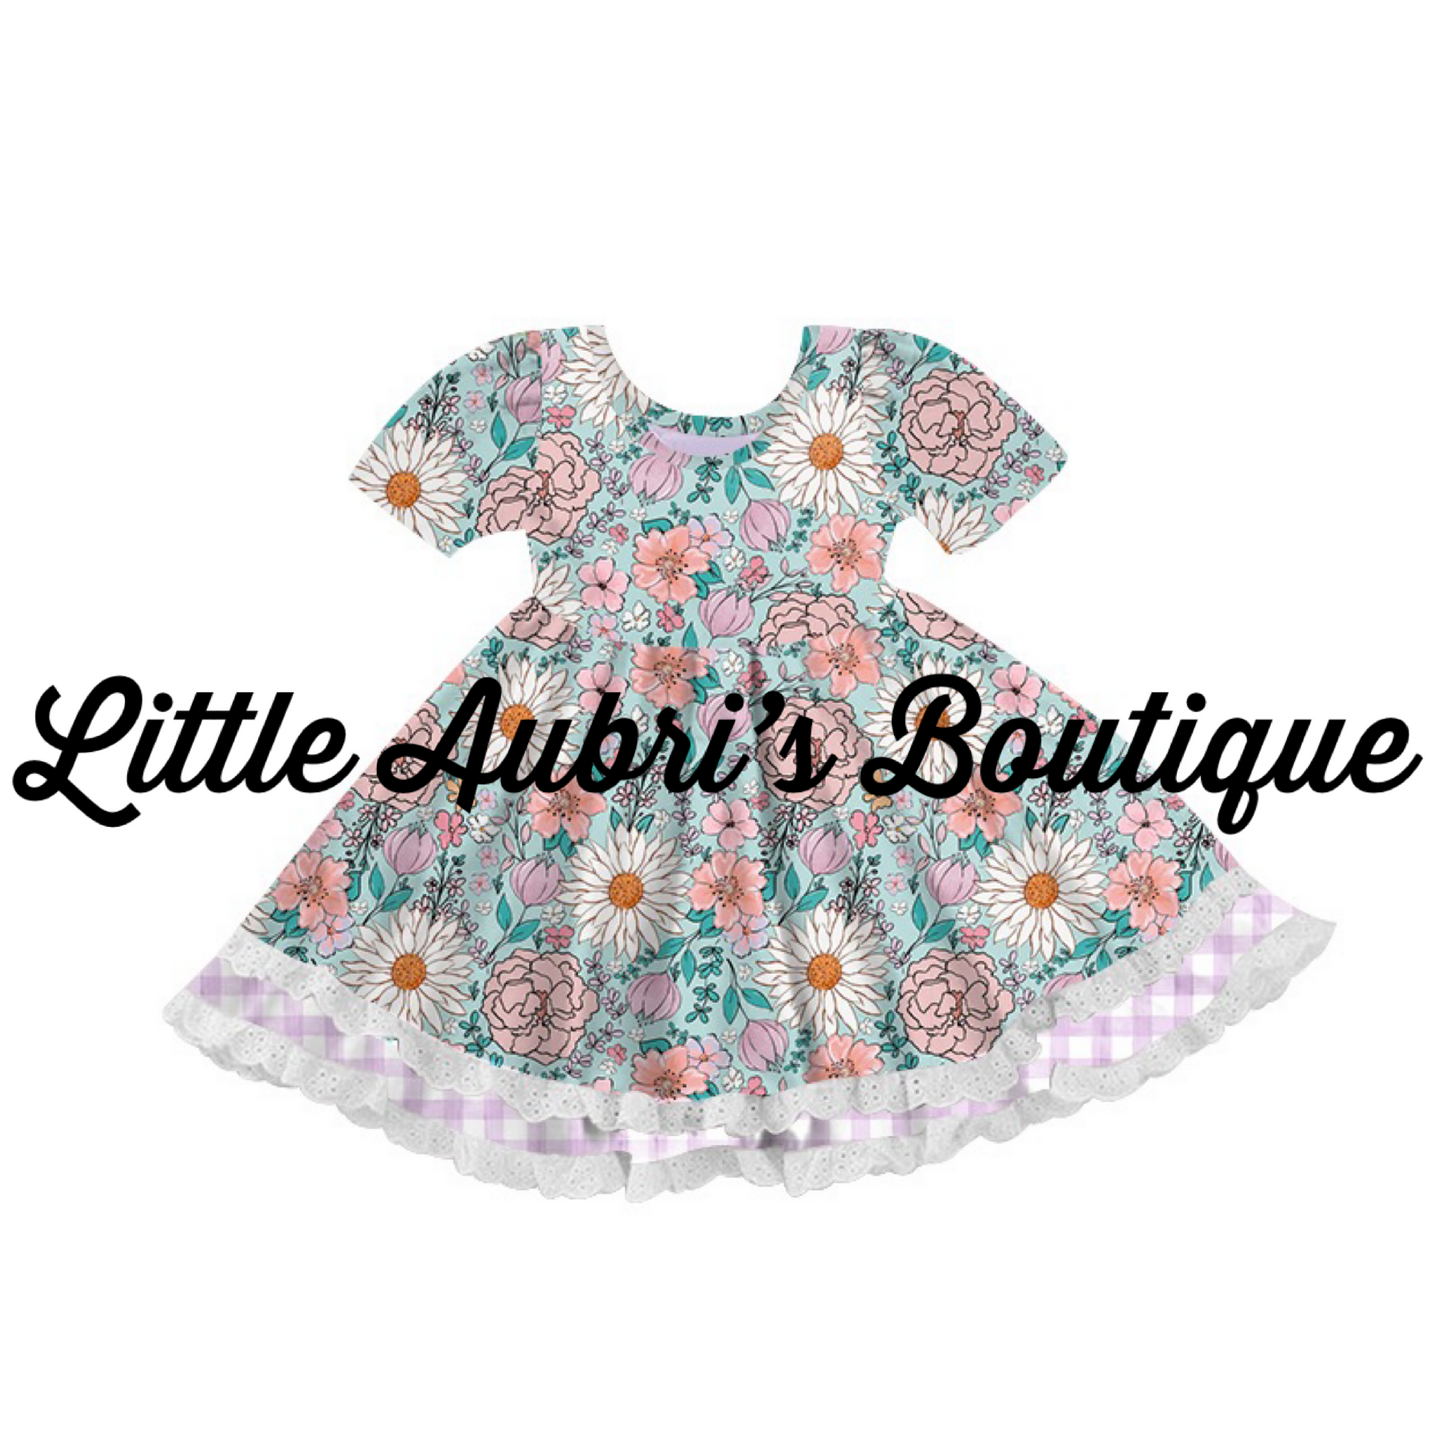 PREORDER Spring Gardens Lace Dress CLOSES 11/24